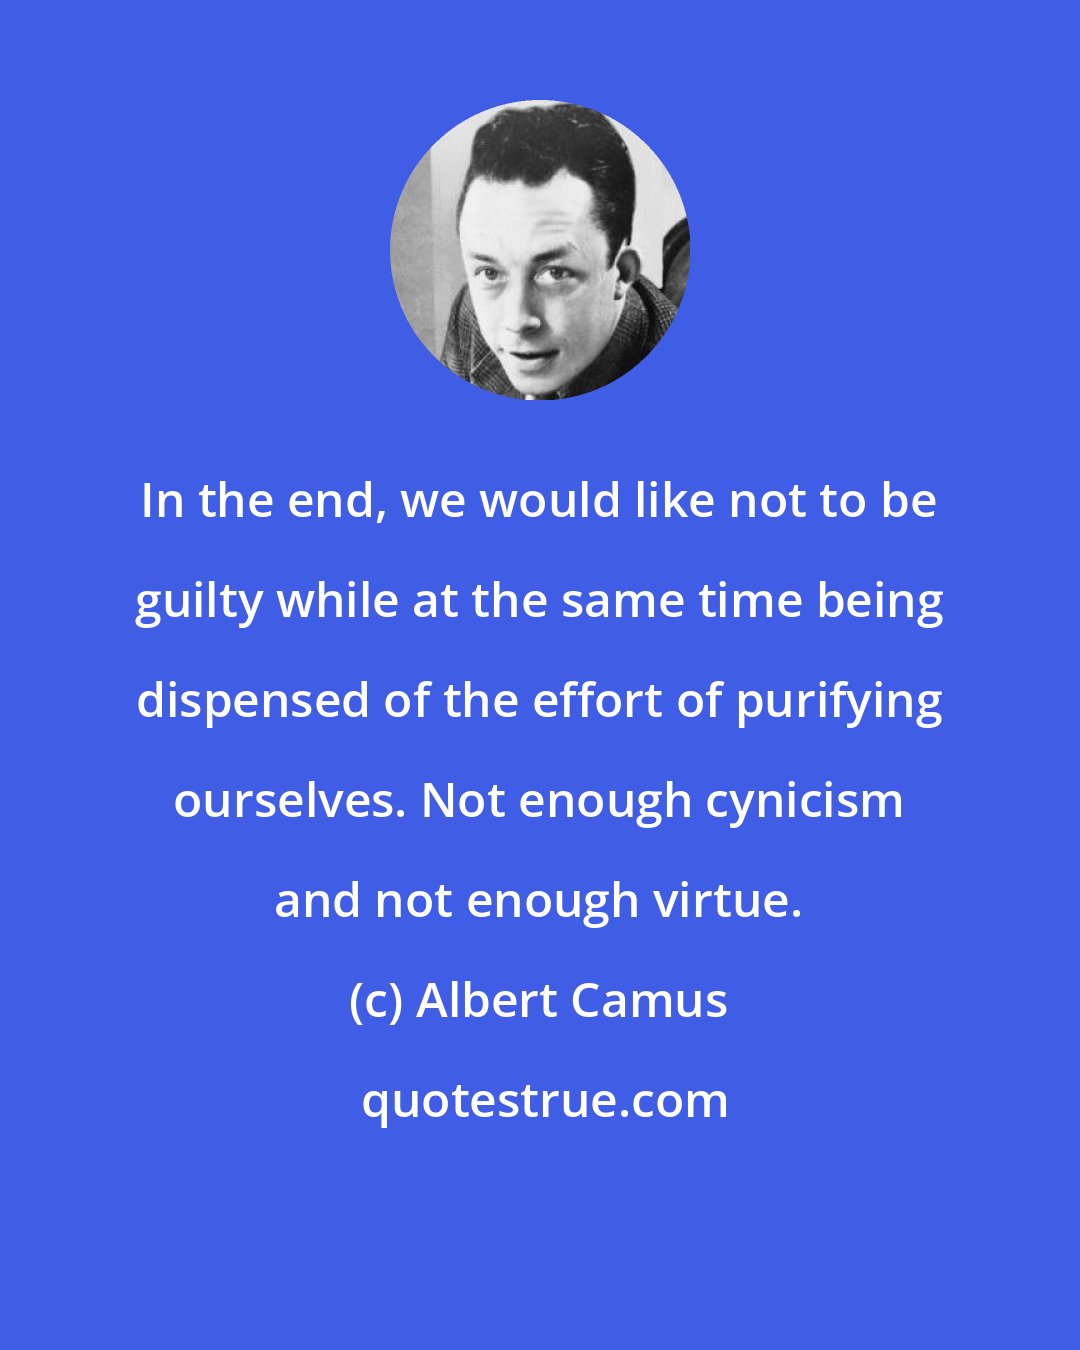 Albert Camus: In the end, we would like not to be guilty while at the same time being dispensed of the effort of purifying ourselves. Not enough cynicism and not enough virtue.